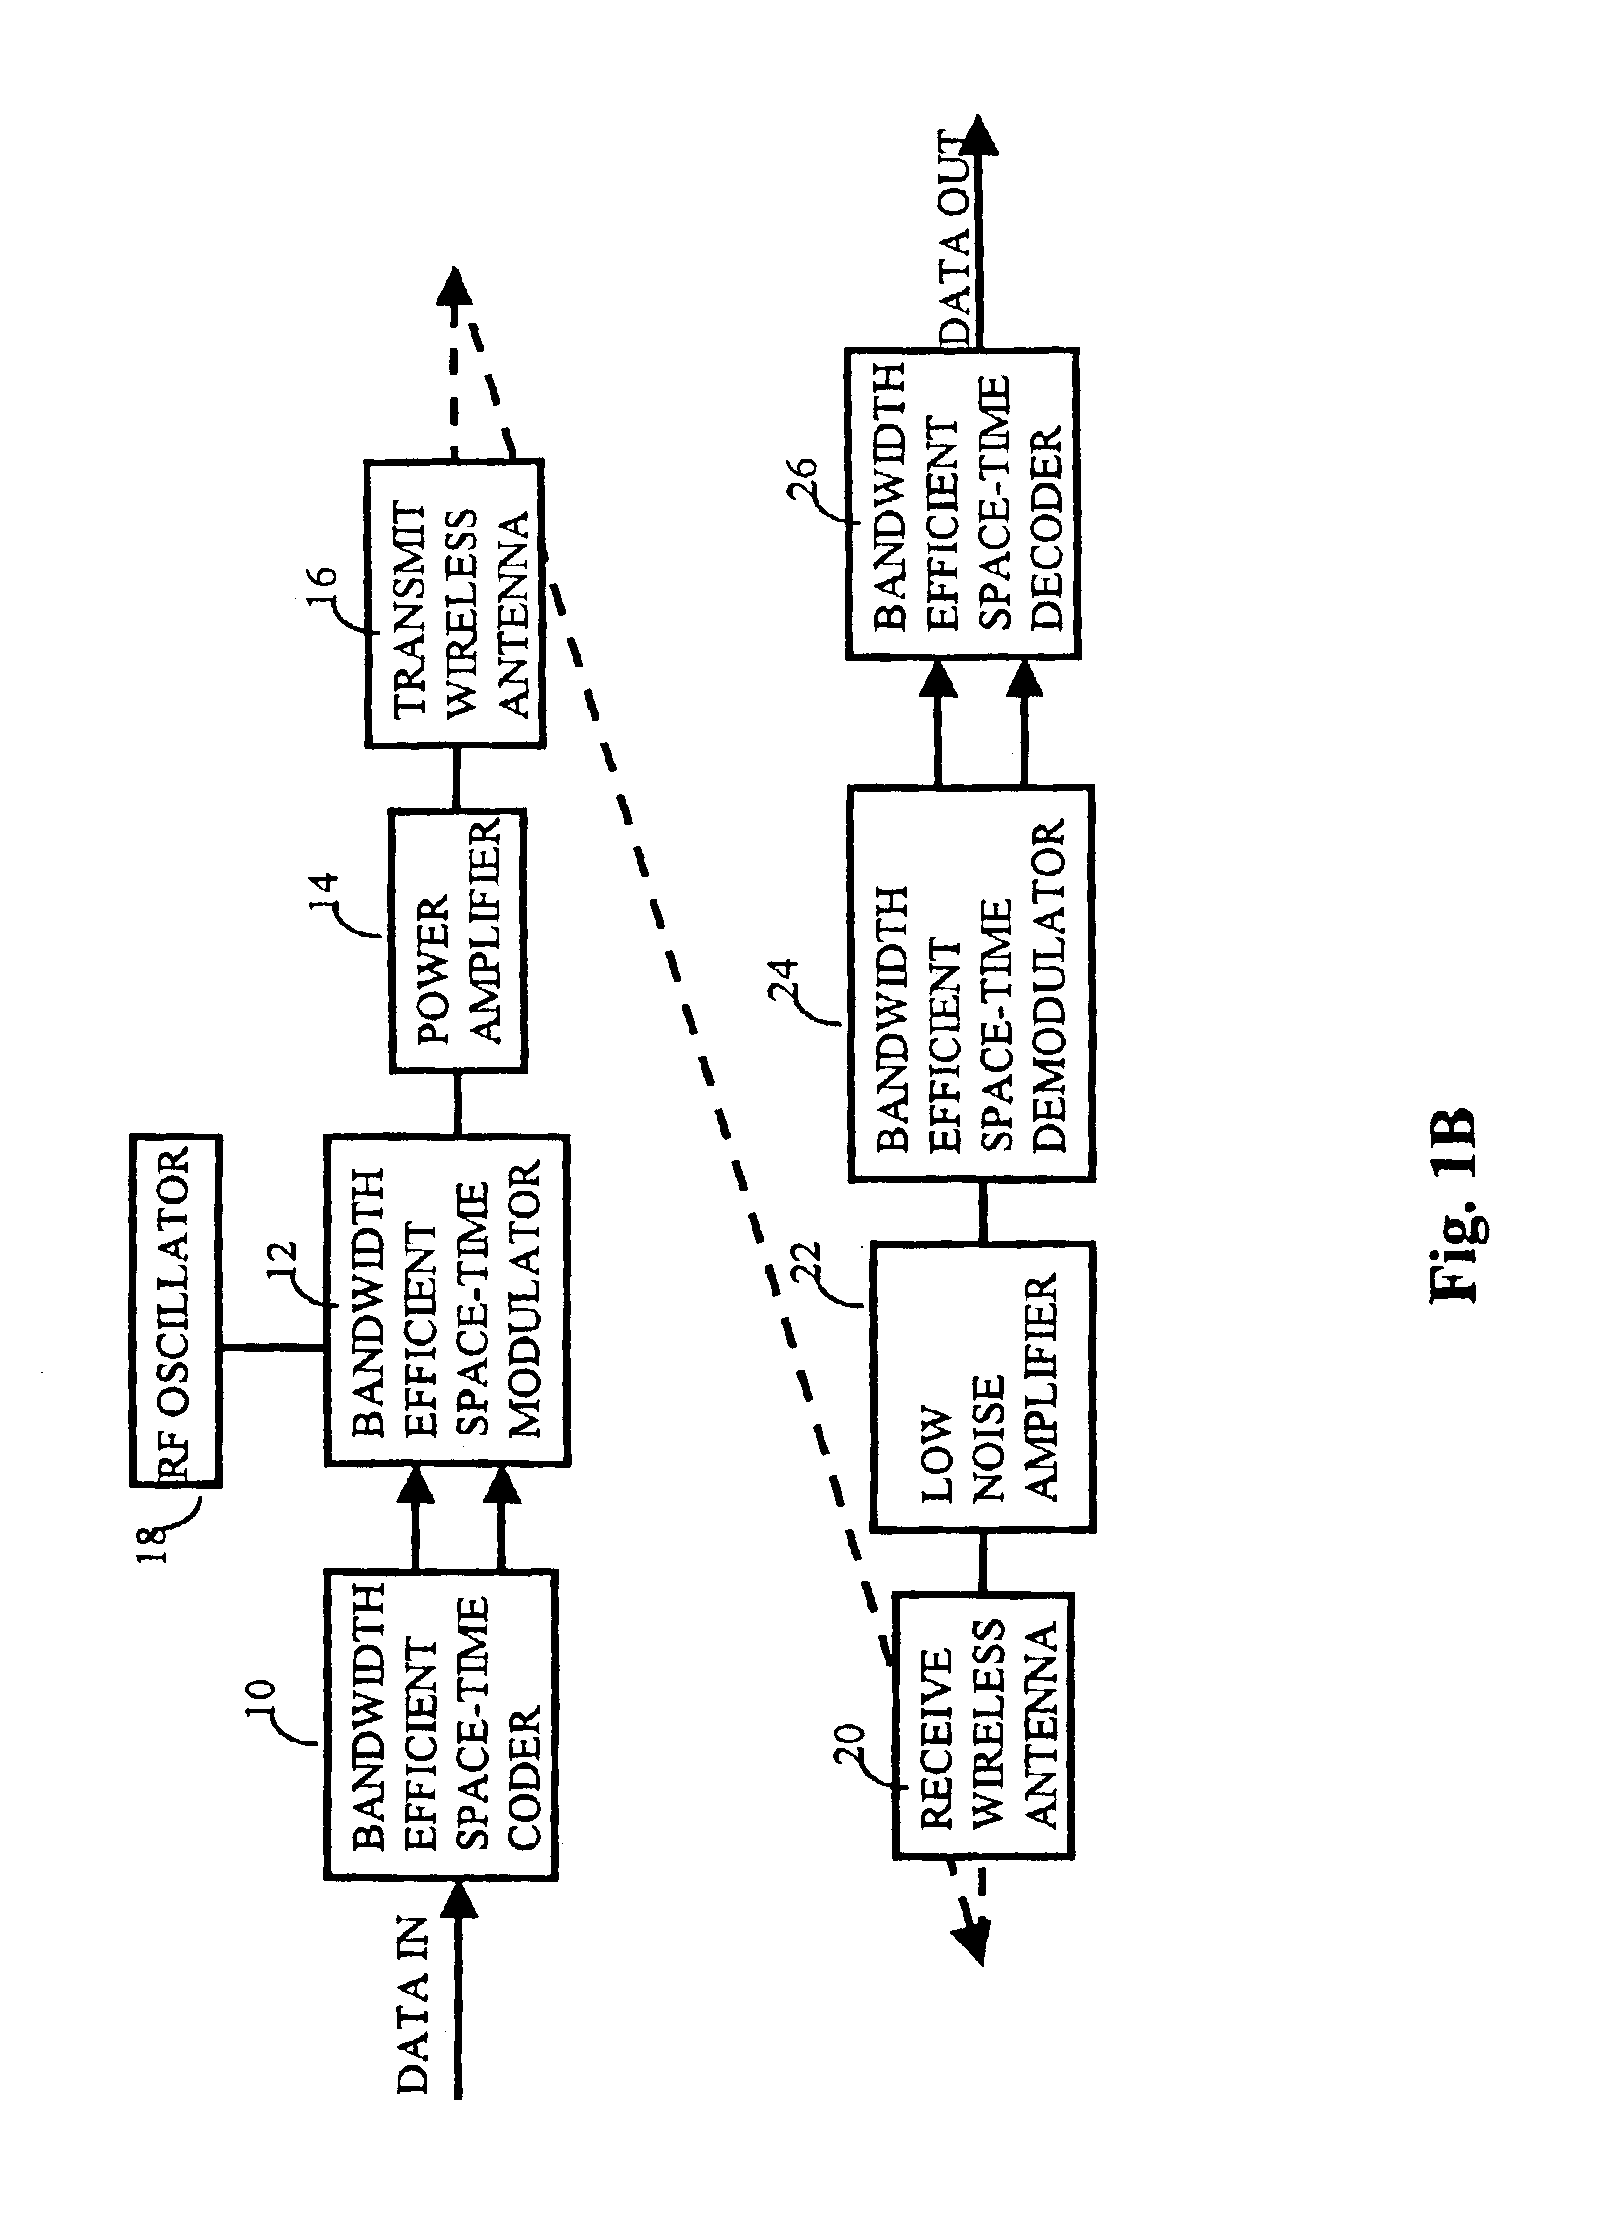 System and method for increasing bandwidth efficiency and throughput of a data transmission network